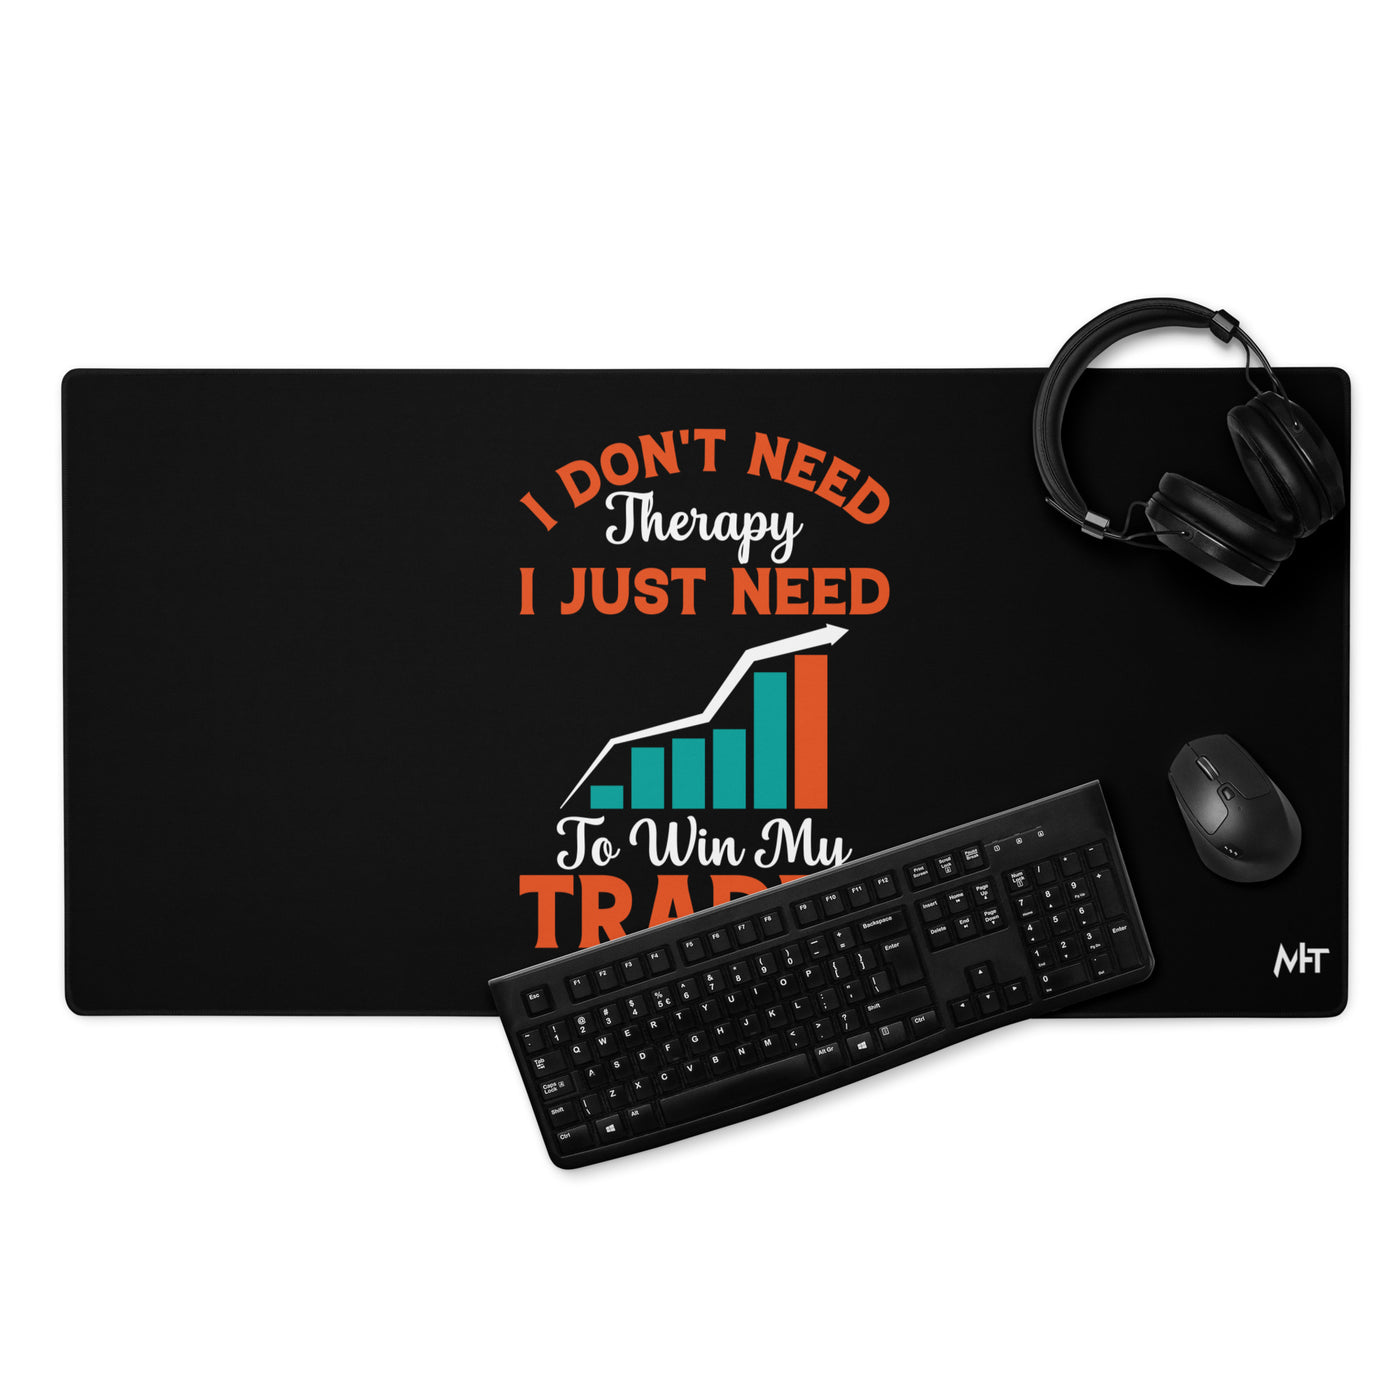 I don't Need therapy, I just Need to Win my Trades - Desk Mat